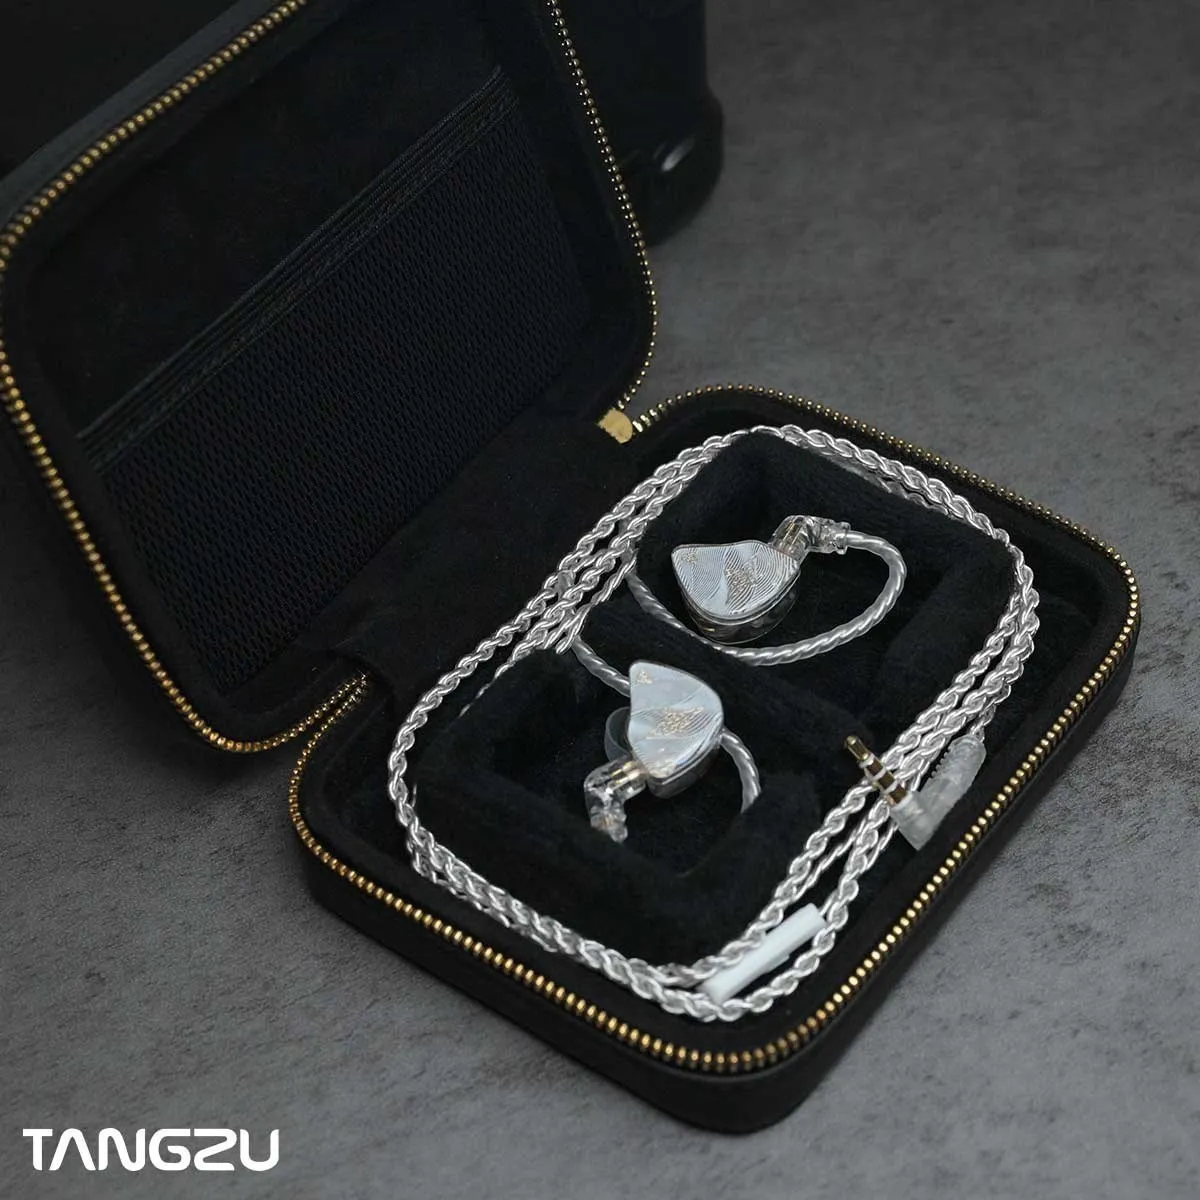 TANGZU Premium Leather Earphone Earbuds Case Compact & Versatile Pouch for Earphones Cables and Audio Accessories